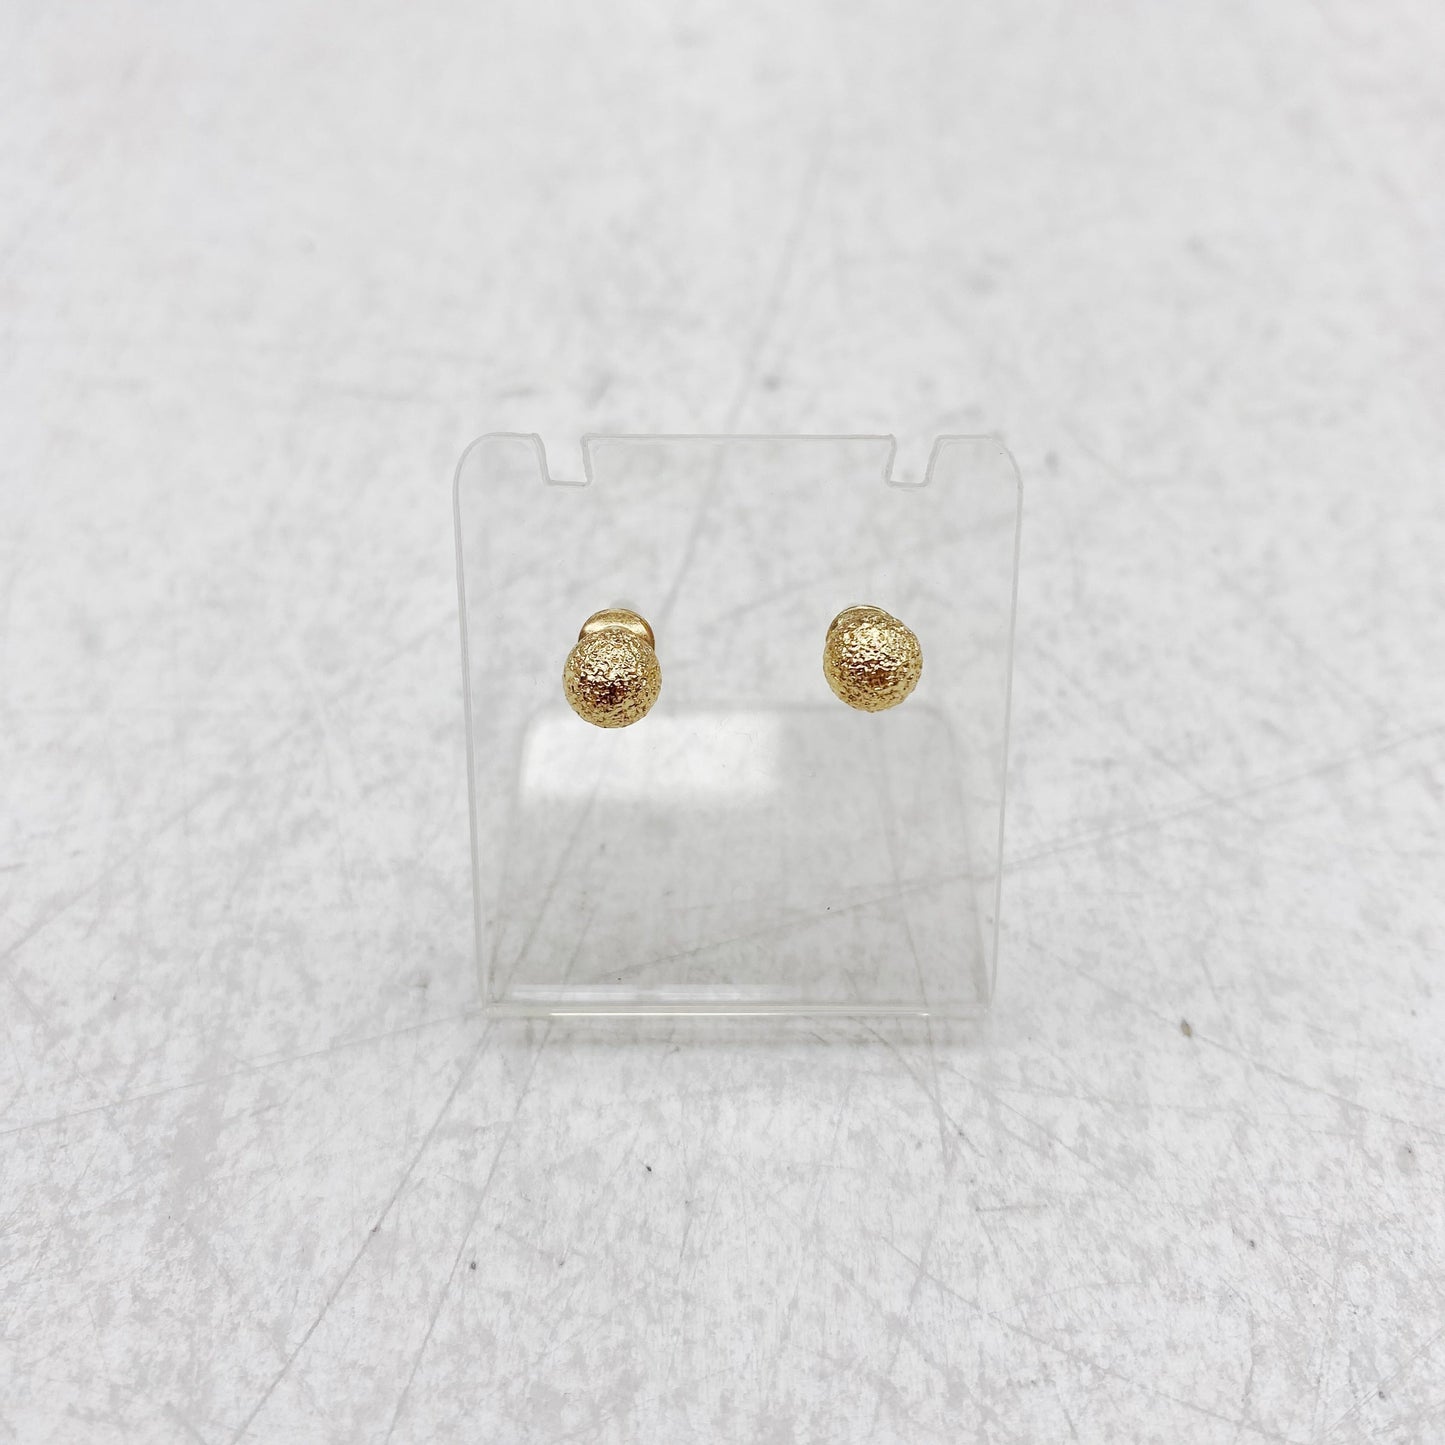 GOLD EARRINGS STUD by CLOTHES MENTOR